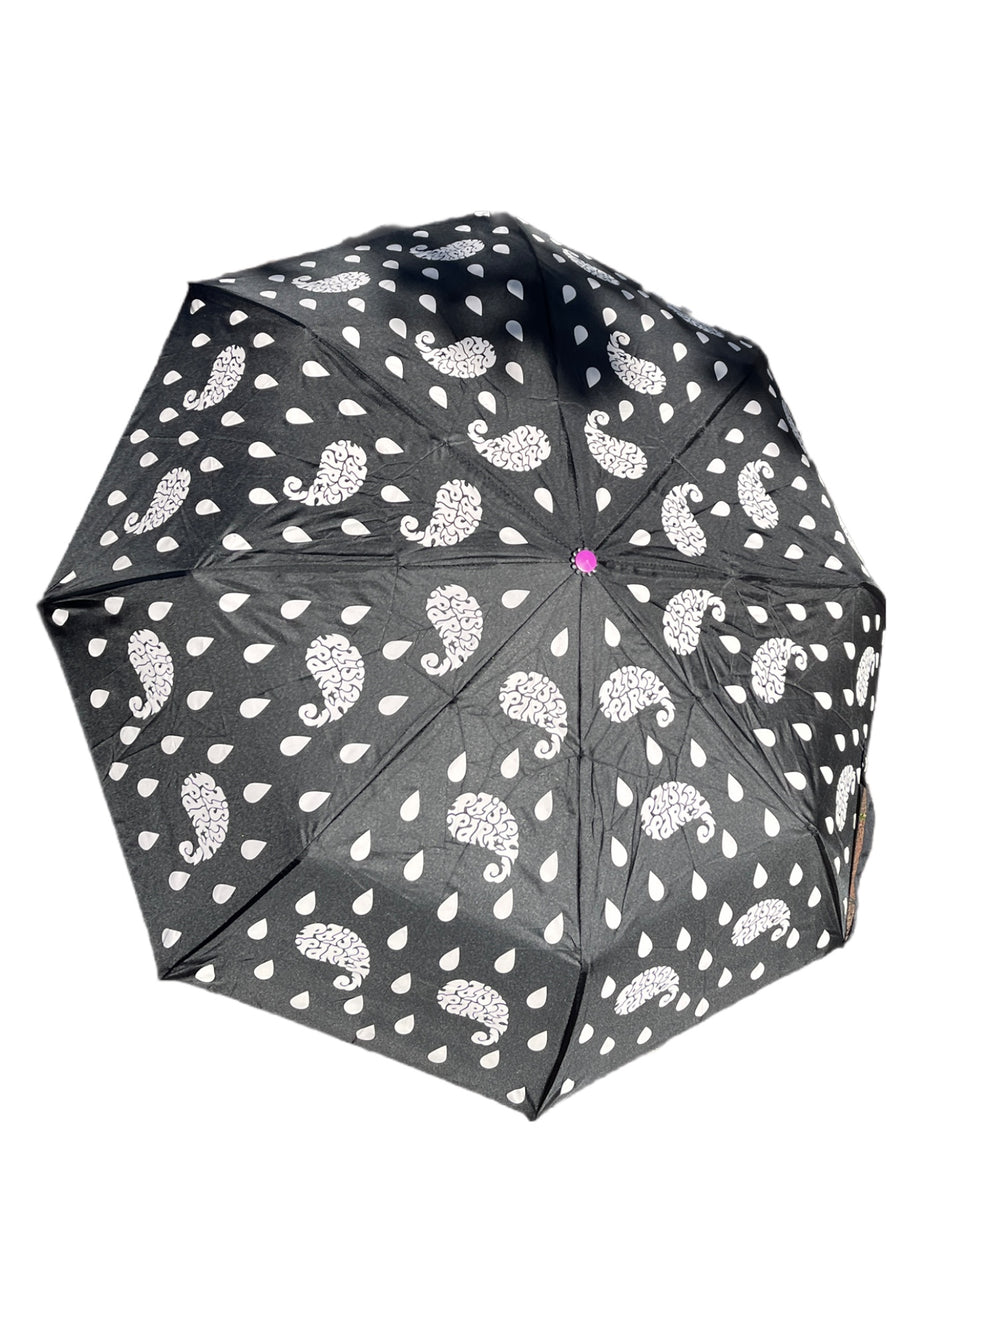 Prince – Paisley Park Official Umbrella Brand New Purple Multi Logo Colour Changing NEW